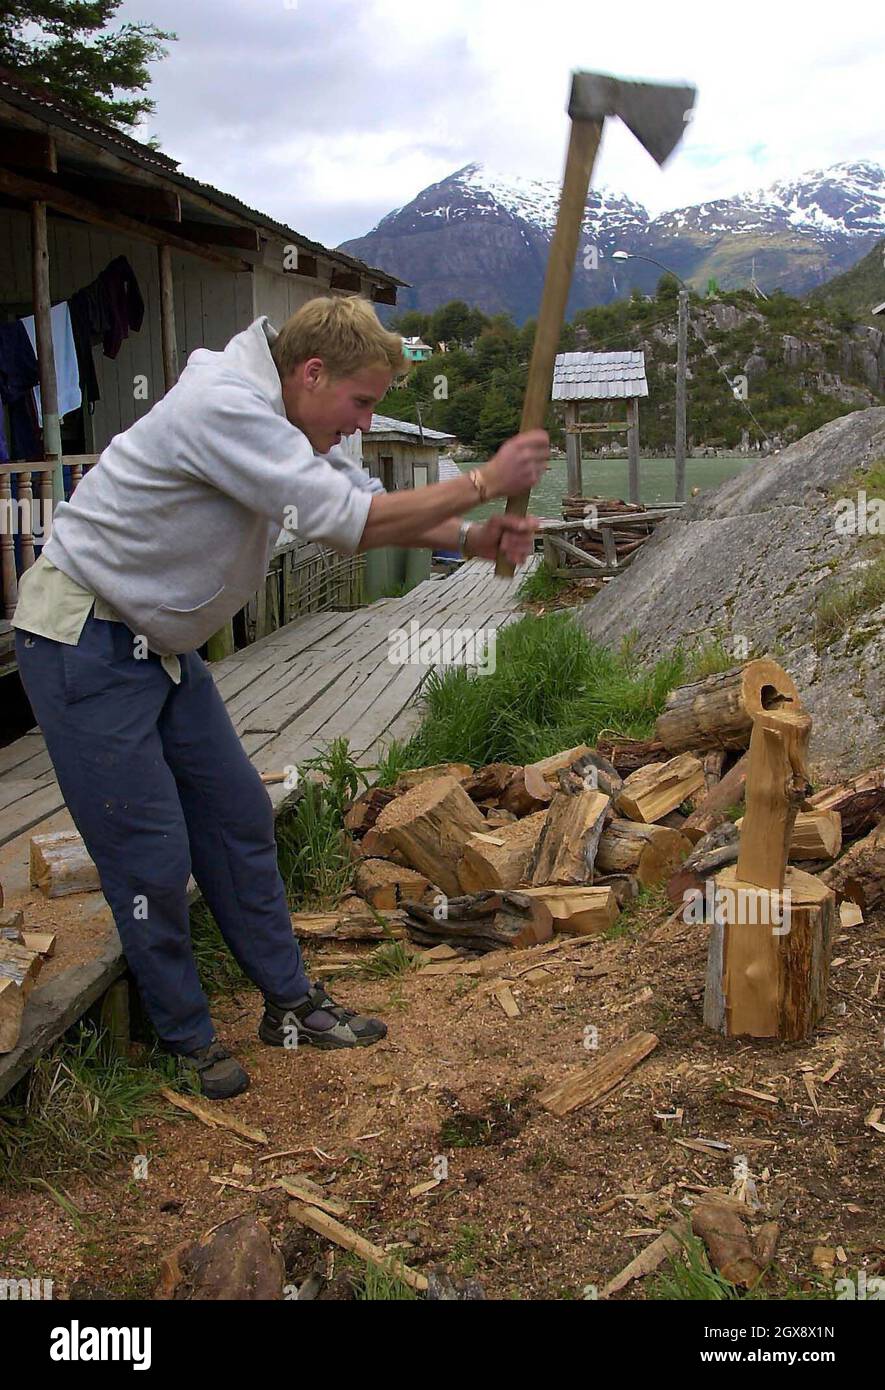 Prince William chops logs outside the team's accommodation in the village of Tortel, Southern Chile during his Raleigh International expedition. December 11th 2000.  Photo.  Anwar Hussein  Stock Photo